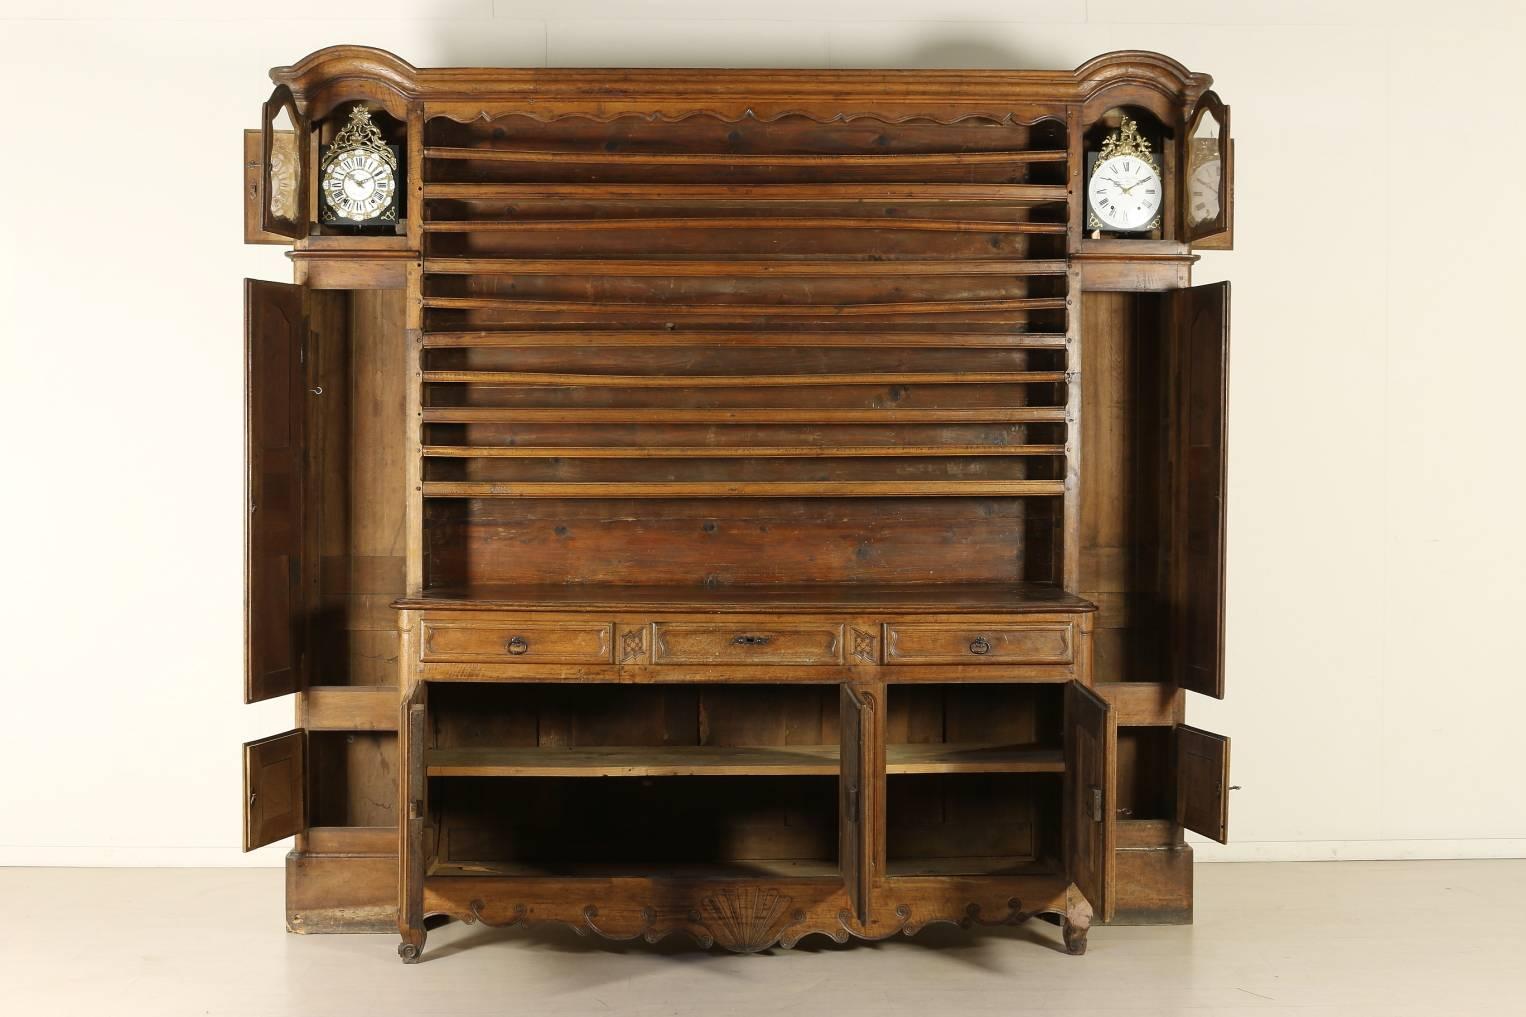 Late 18th century walnut cupboard with plate rack and (not coeval) clocks, three doors and three drawers. Front with typical Provence carvings. Manufactured in France.